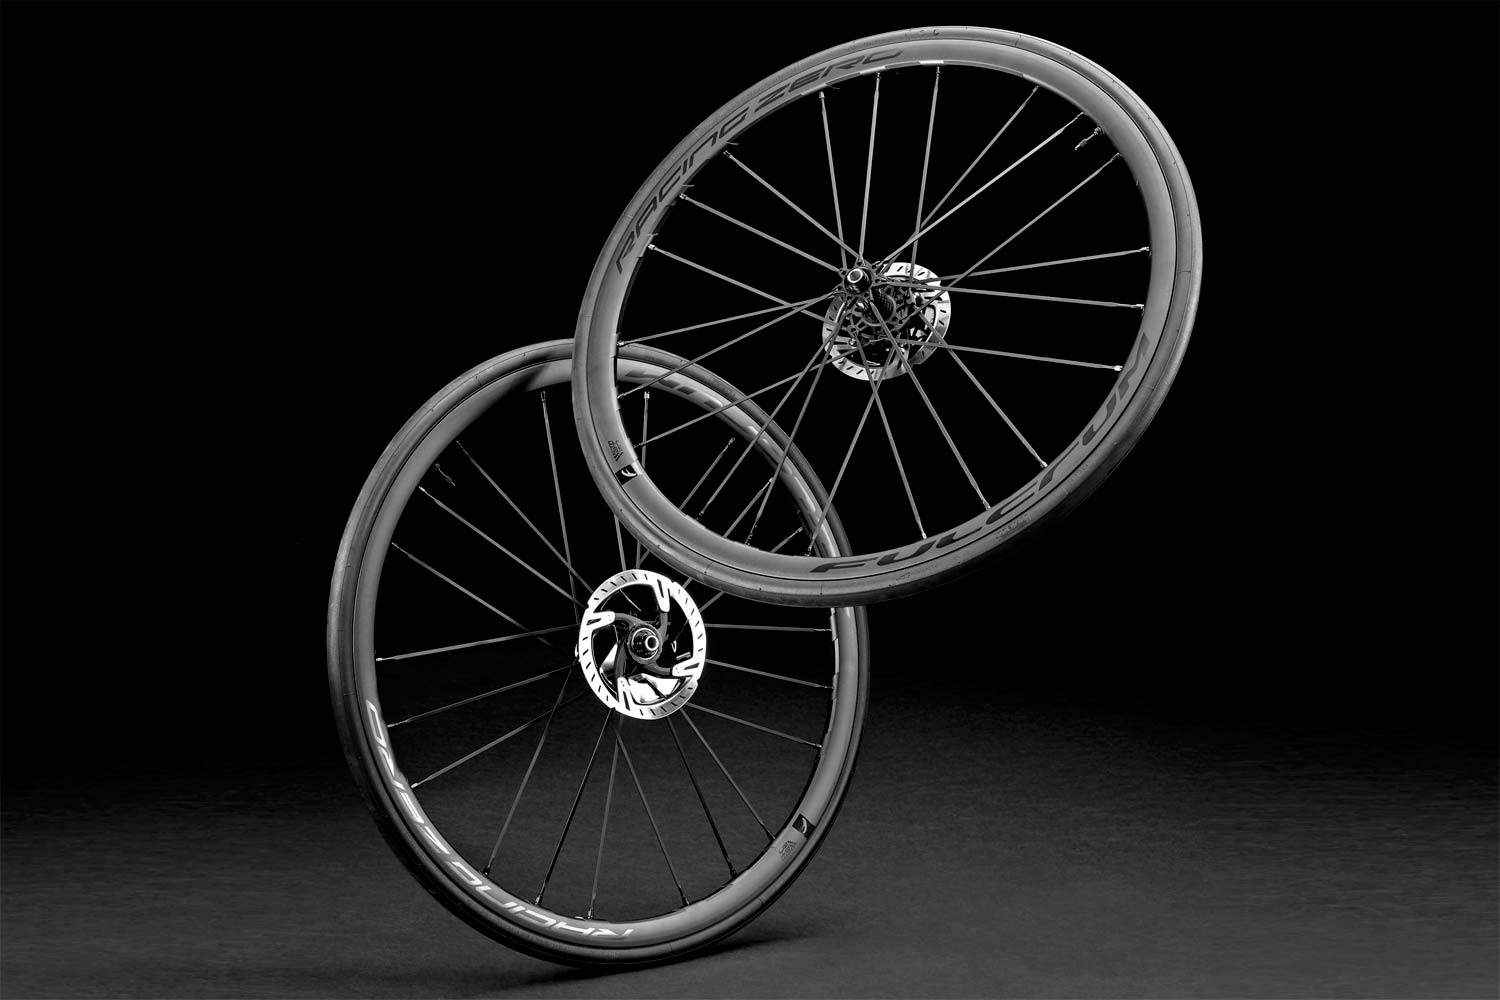 Fulcrum Racing Zero Cmptzn DB steps up the competition in alloy road wheels